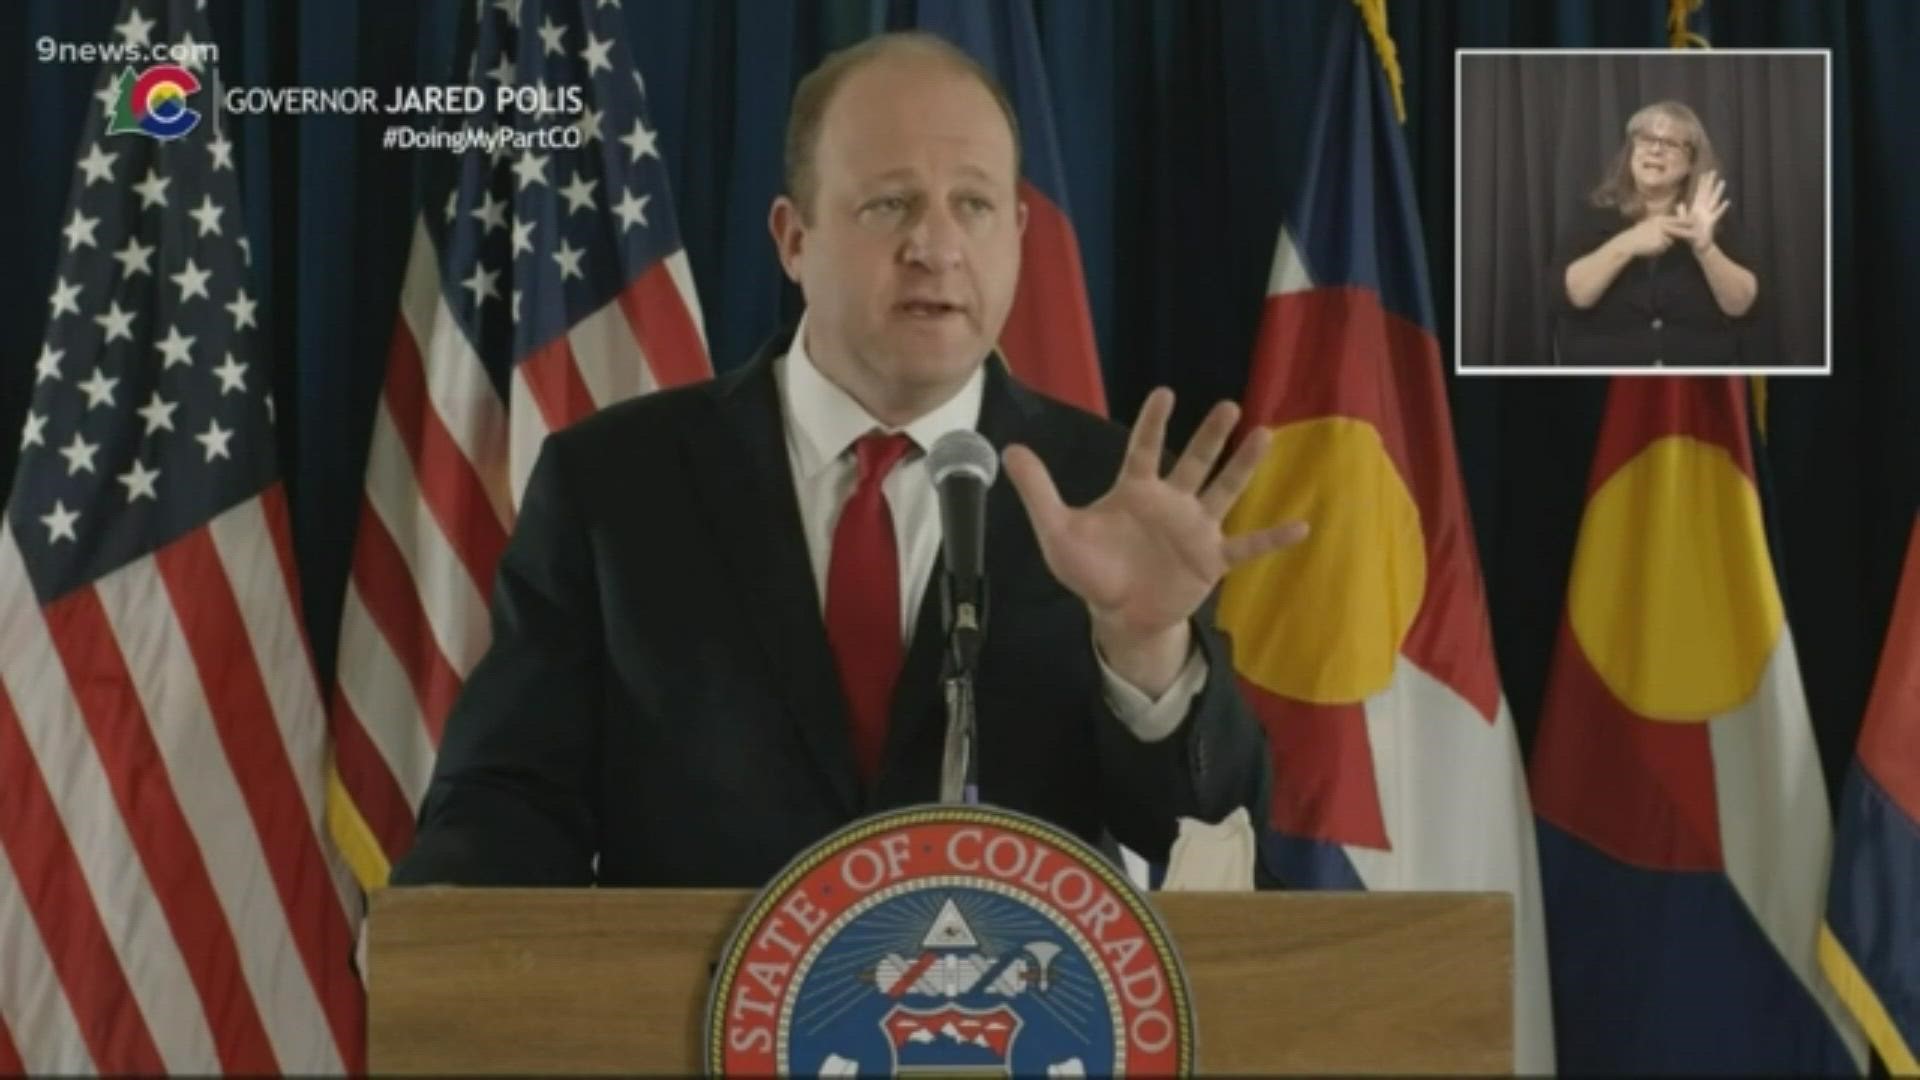 Gov. Jared Polis gives an update on Colorado's response to the COVID-19 pandemic on Thursday, June 11.